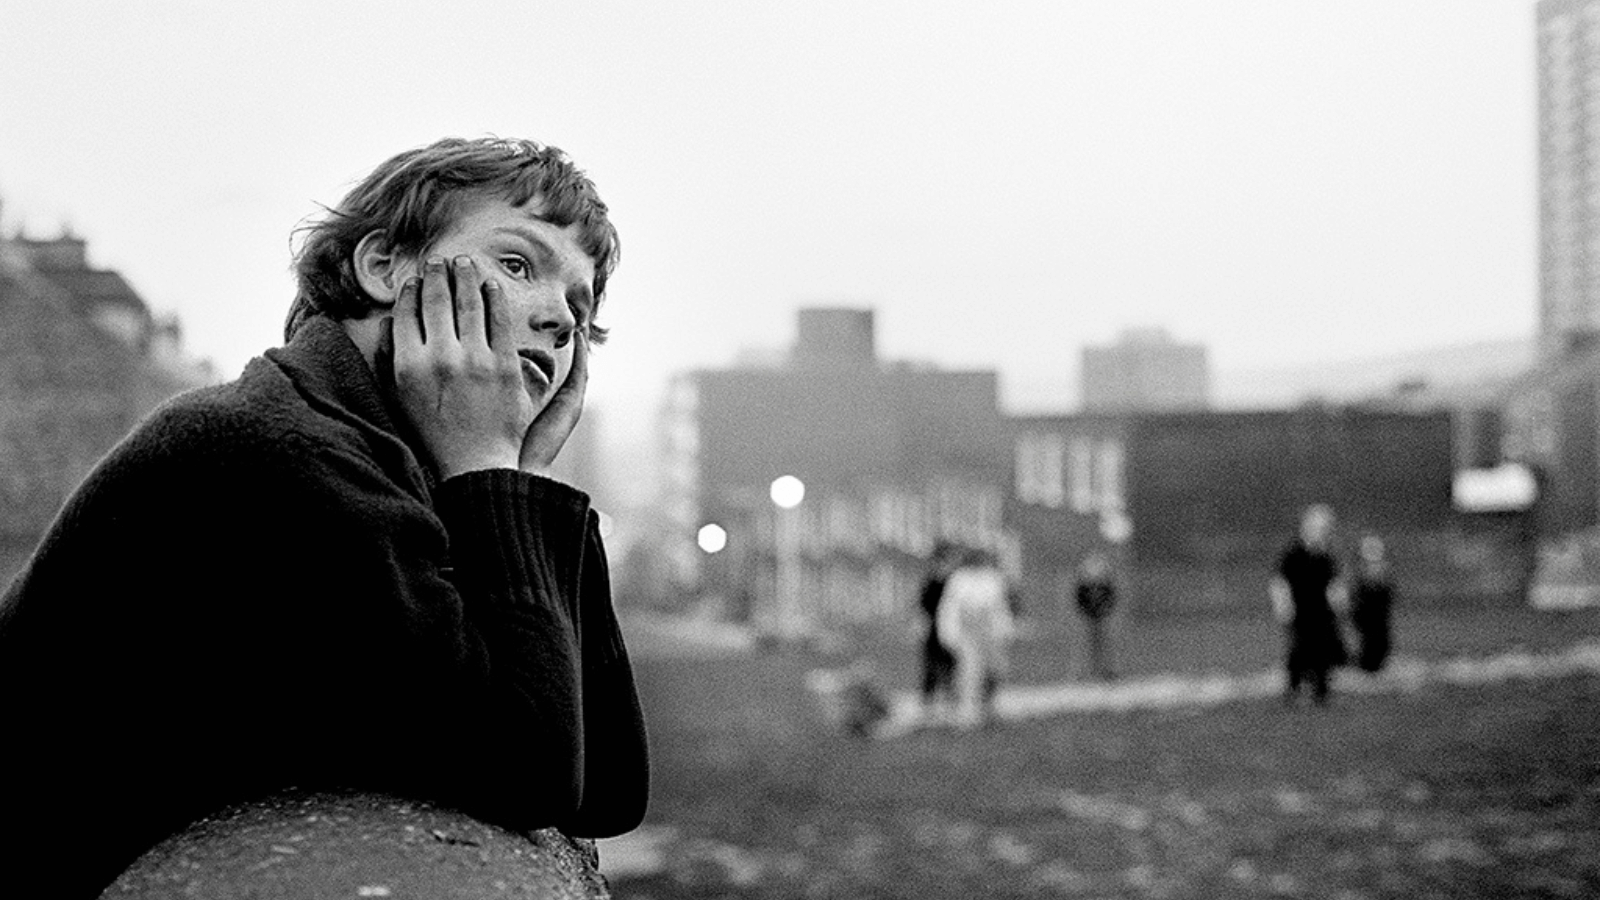 TISH_Kids_jumping_on_to_mattresses_Youth_Unemployment_1981_Tish_Murtha_ONLINE_Ella_Murtha_all_rights_reserved